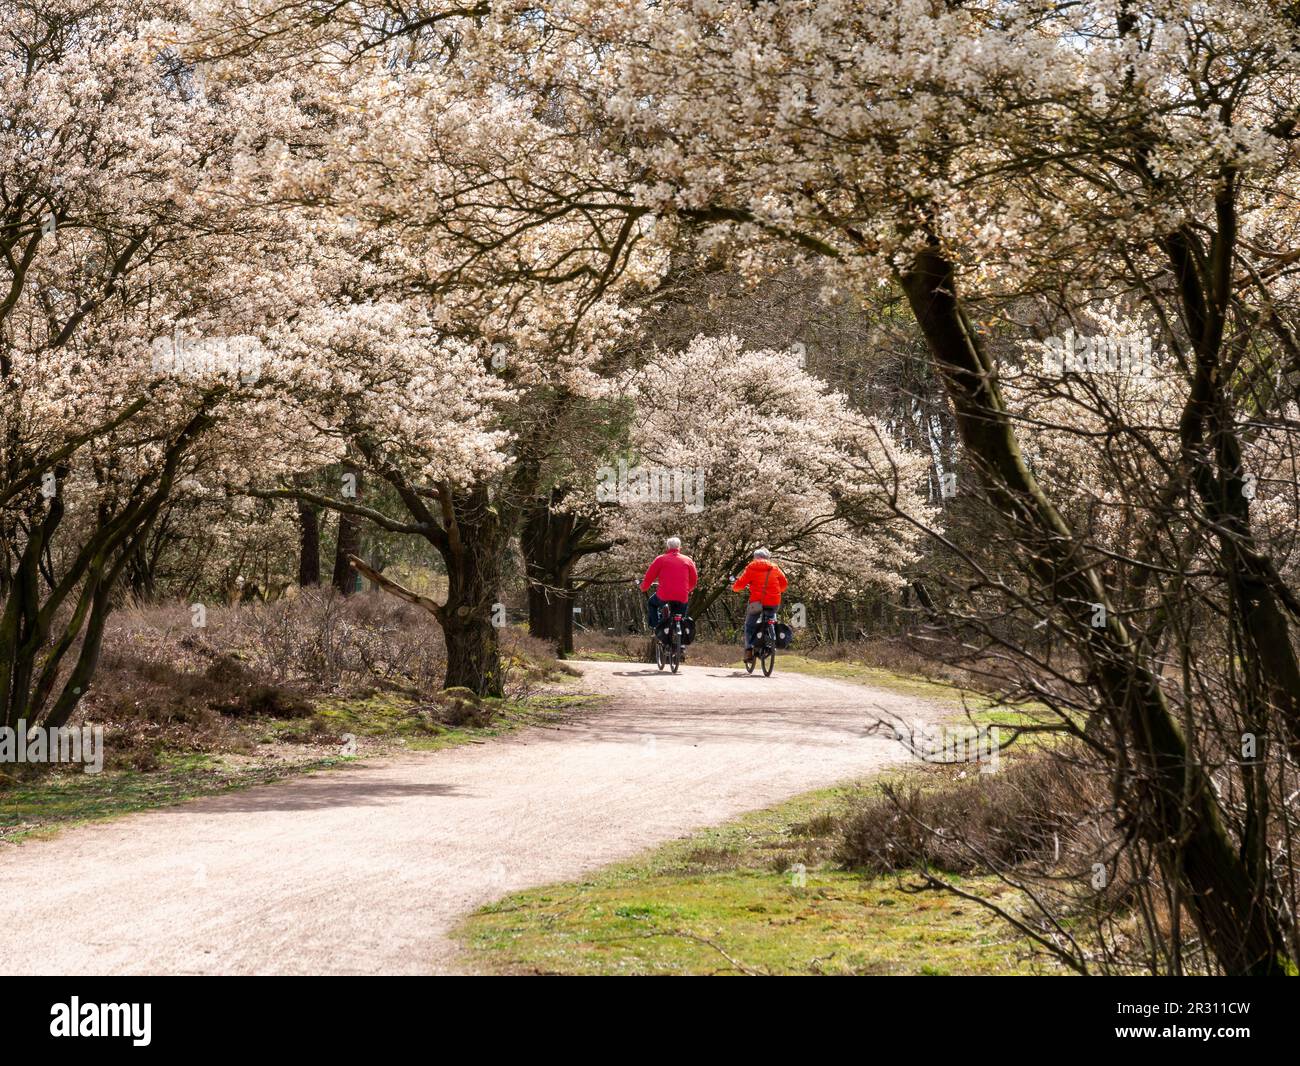 Older couple riding bicycles on cycle path, blooming juneberry trees, Amelanchier lamarkii, in Zuiderheide nature reserve, Het Gooi, Netherlands Stock Photo